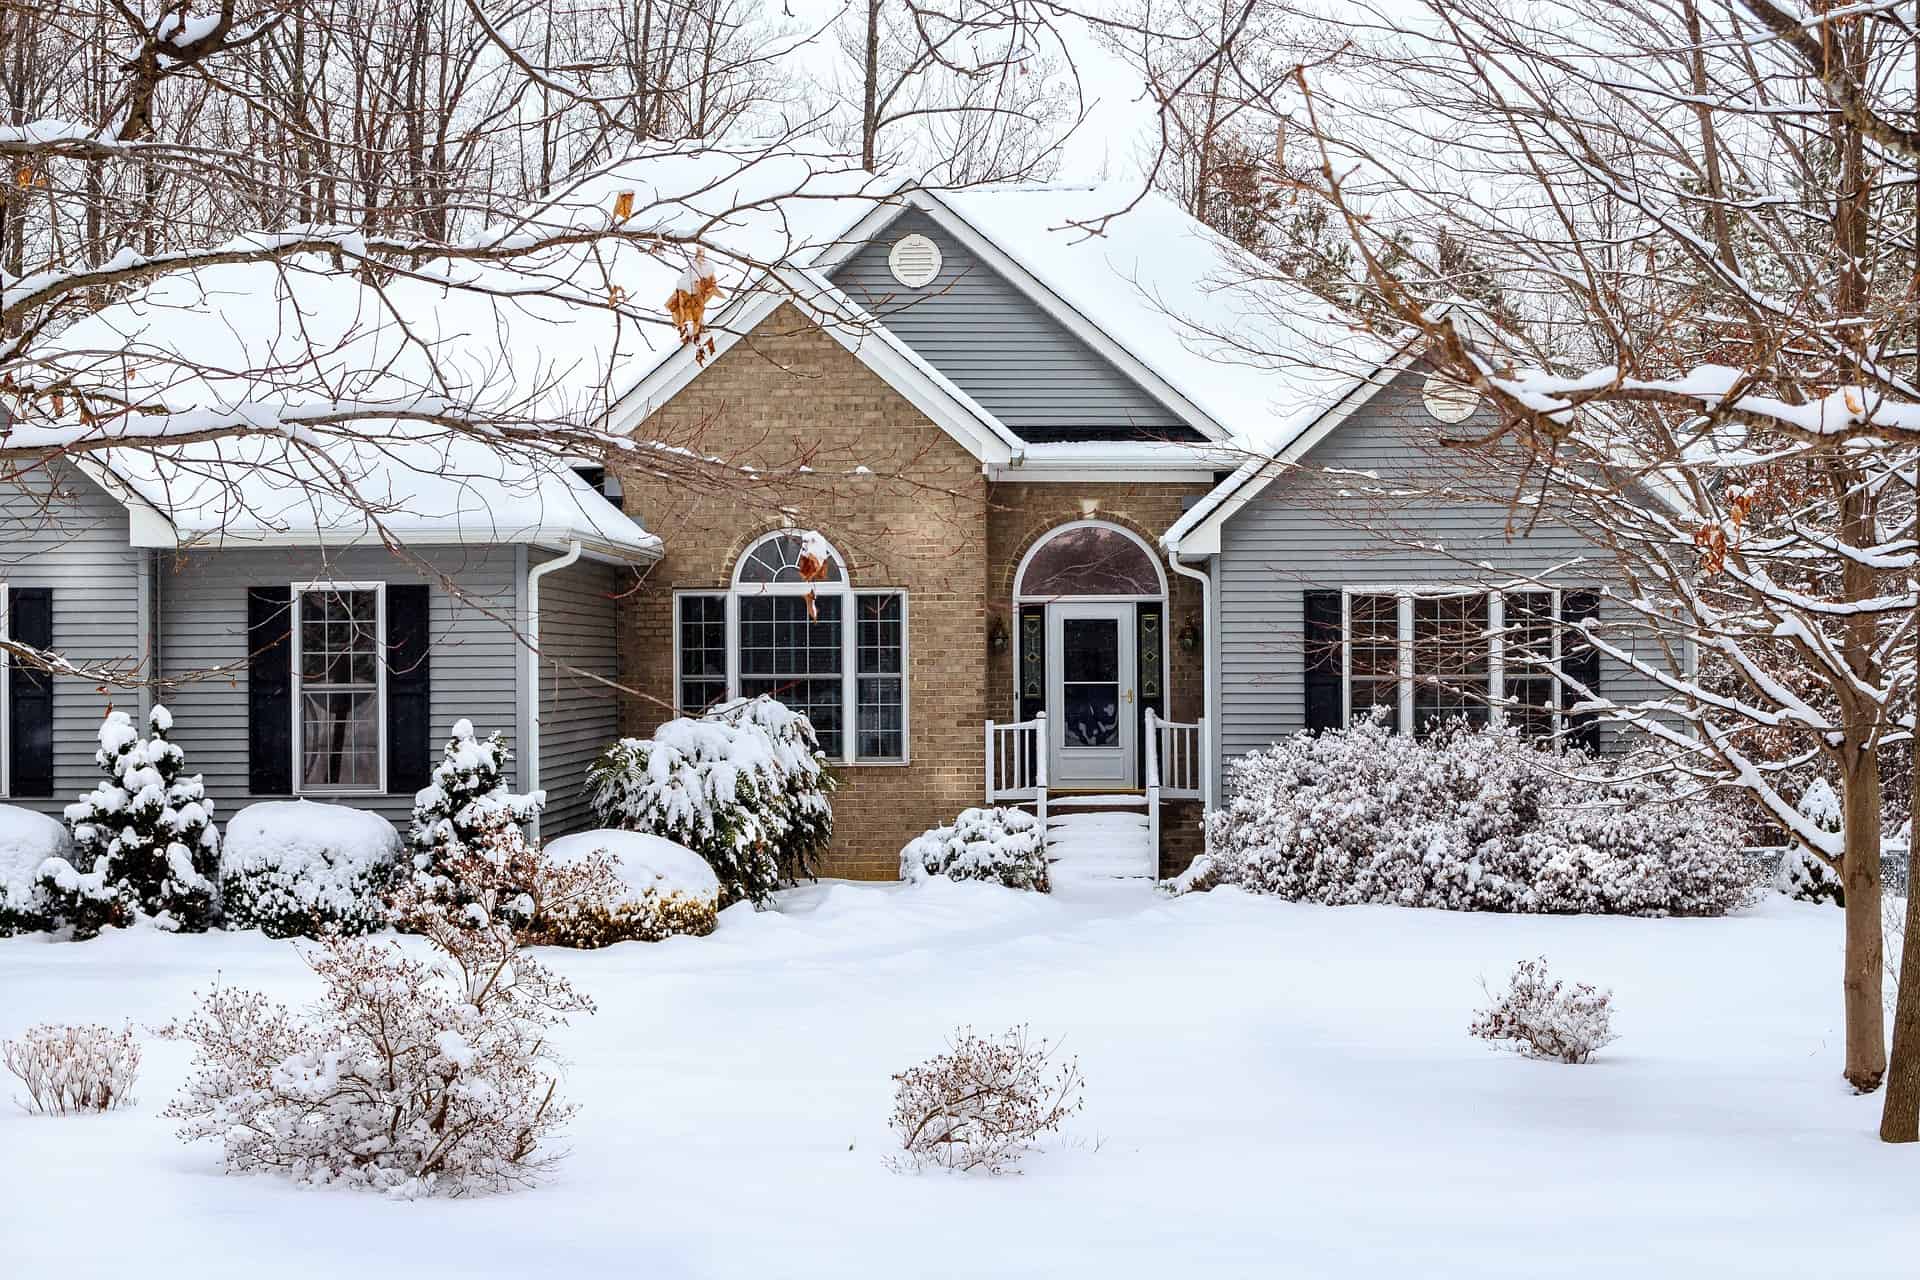 How to Use Snow Melting Mats to Clear Snow Around the House